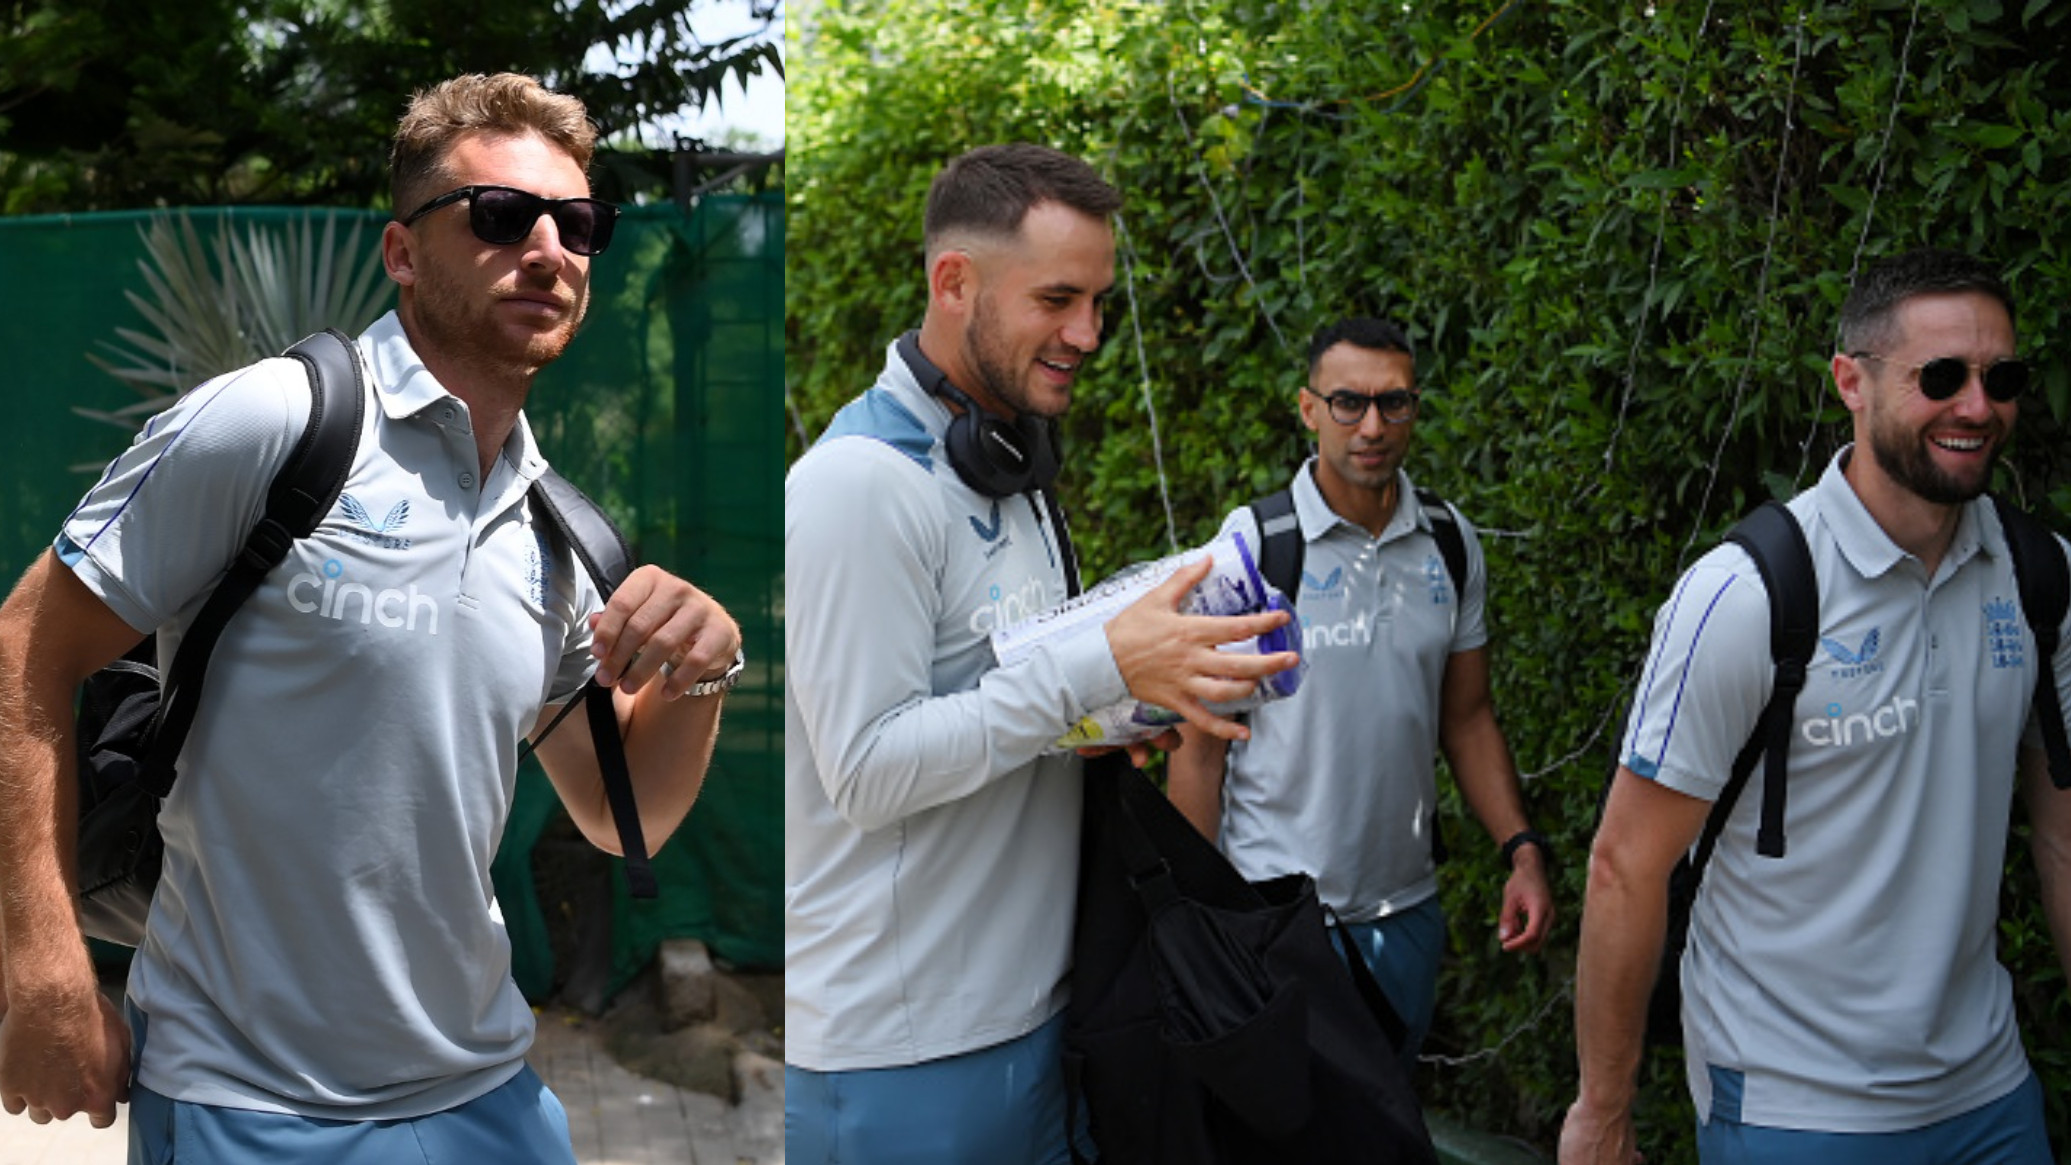 PAK v ENG 2022: WATCH- England players arrive in Pakistan for a series for the first time in 17 years